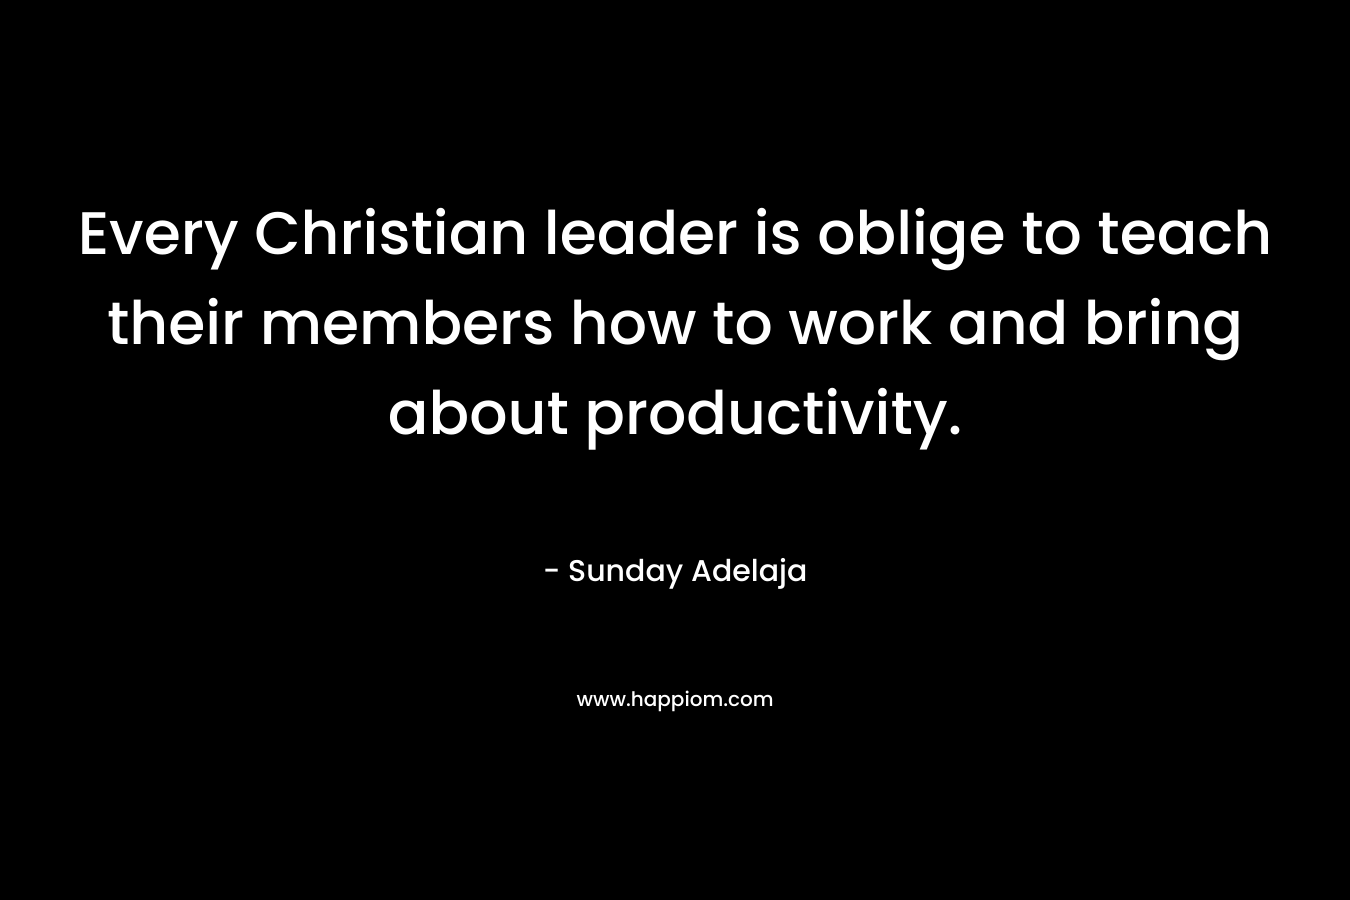 Every Christian leader is oblige to teach their members how to work and bring about productivity. – Sunday Adelaja